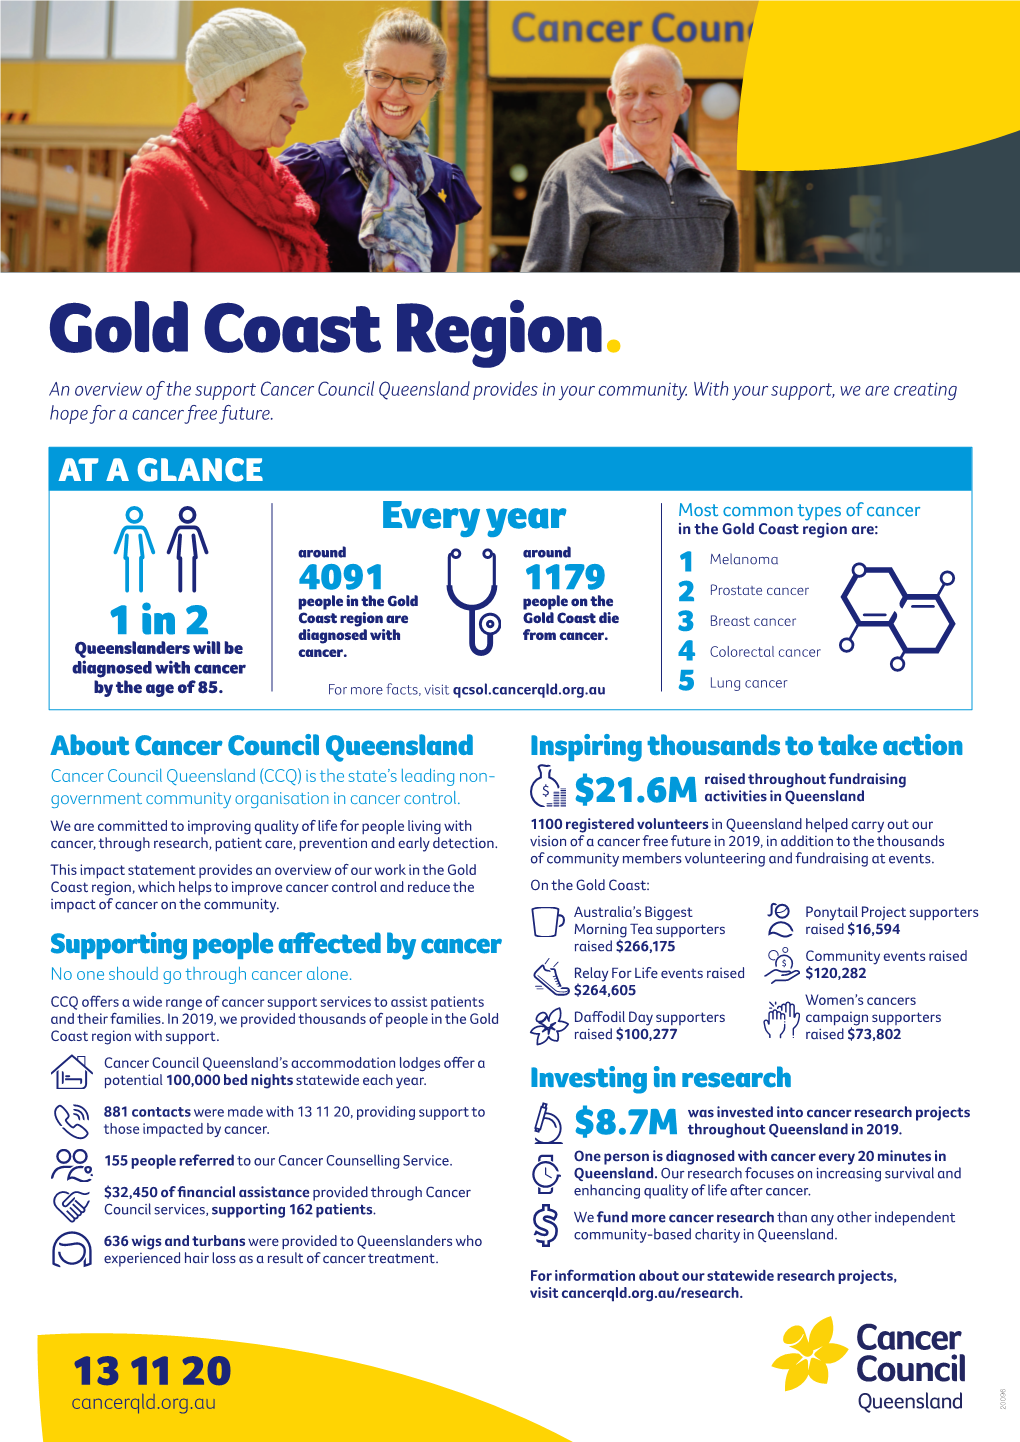 Gold Coast Region. an Overview of the Support Cancer Council Queensland Provides in Your Community